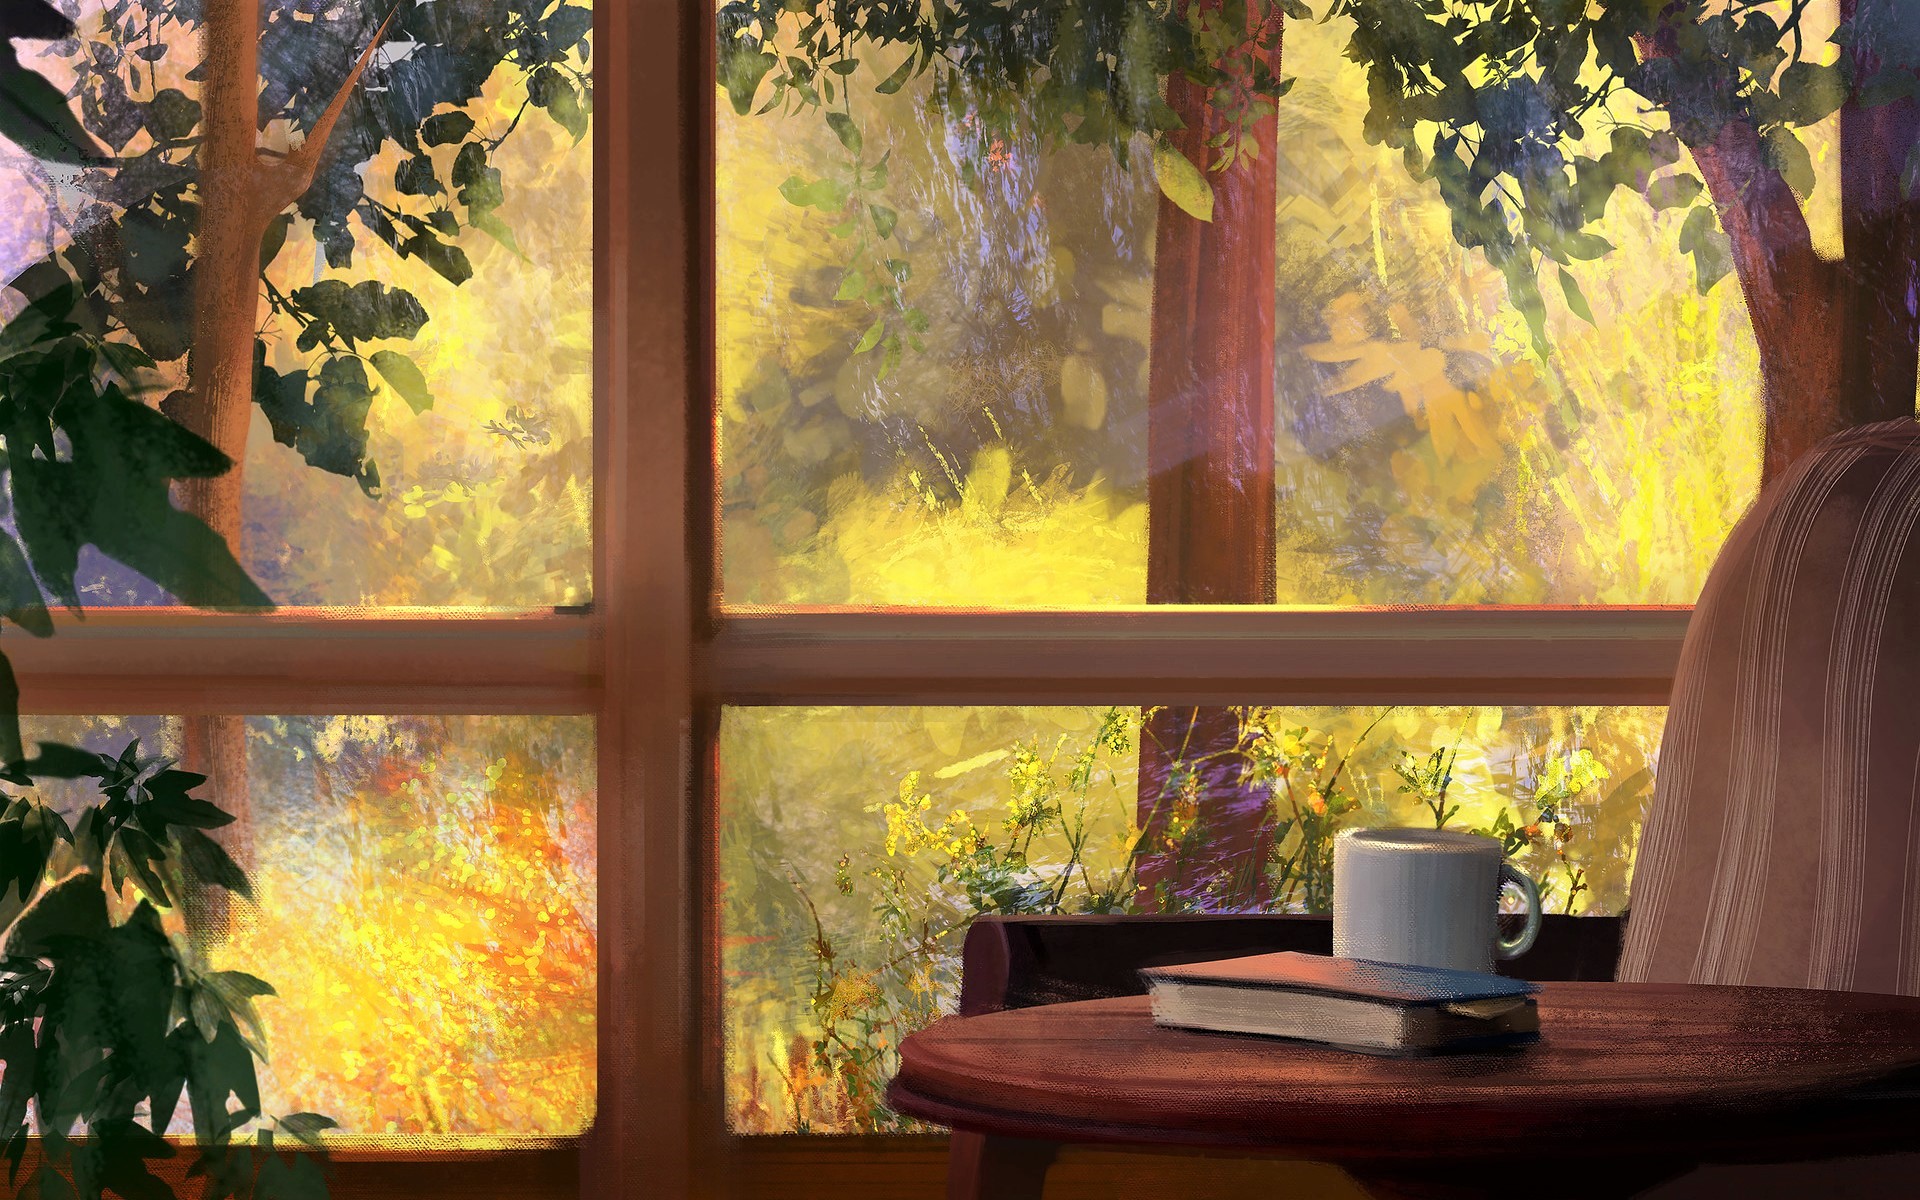 table, artistic, painting, book, window